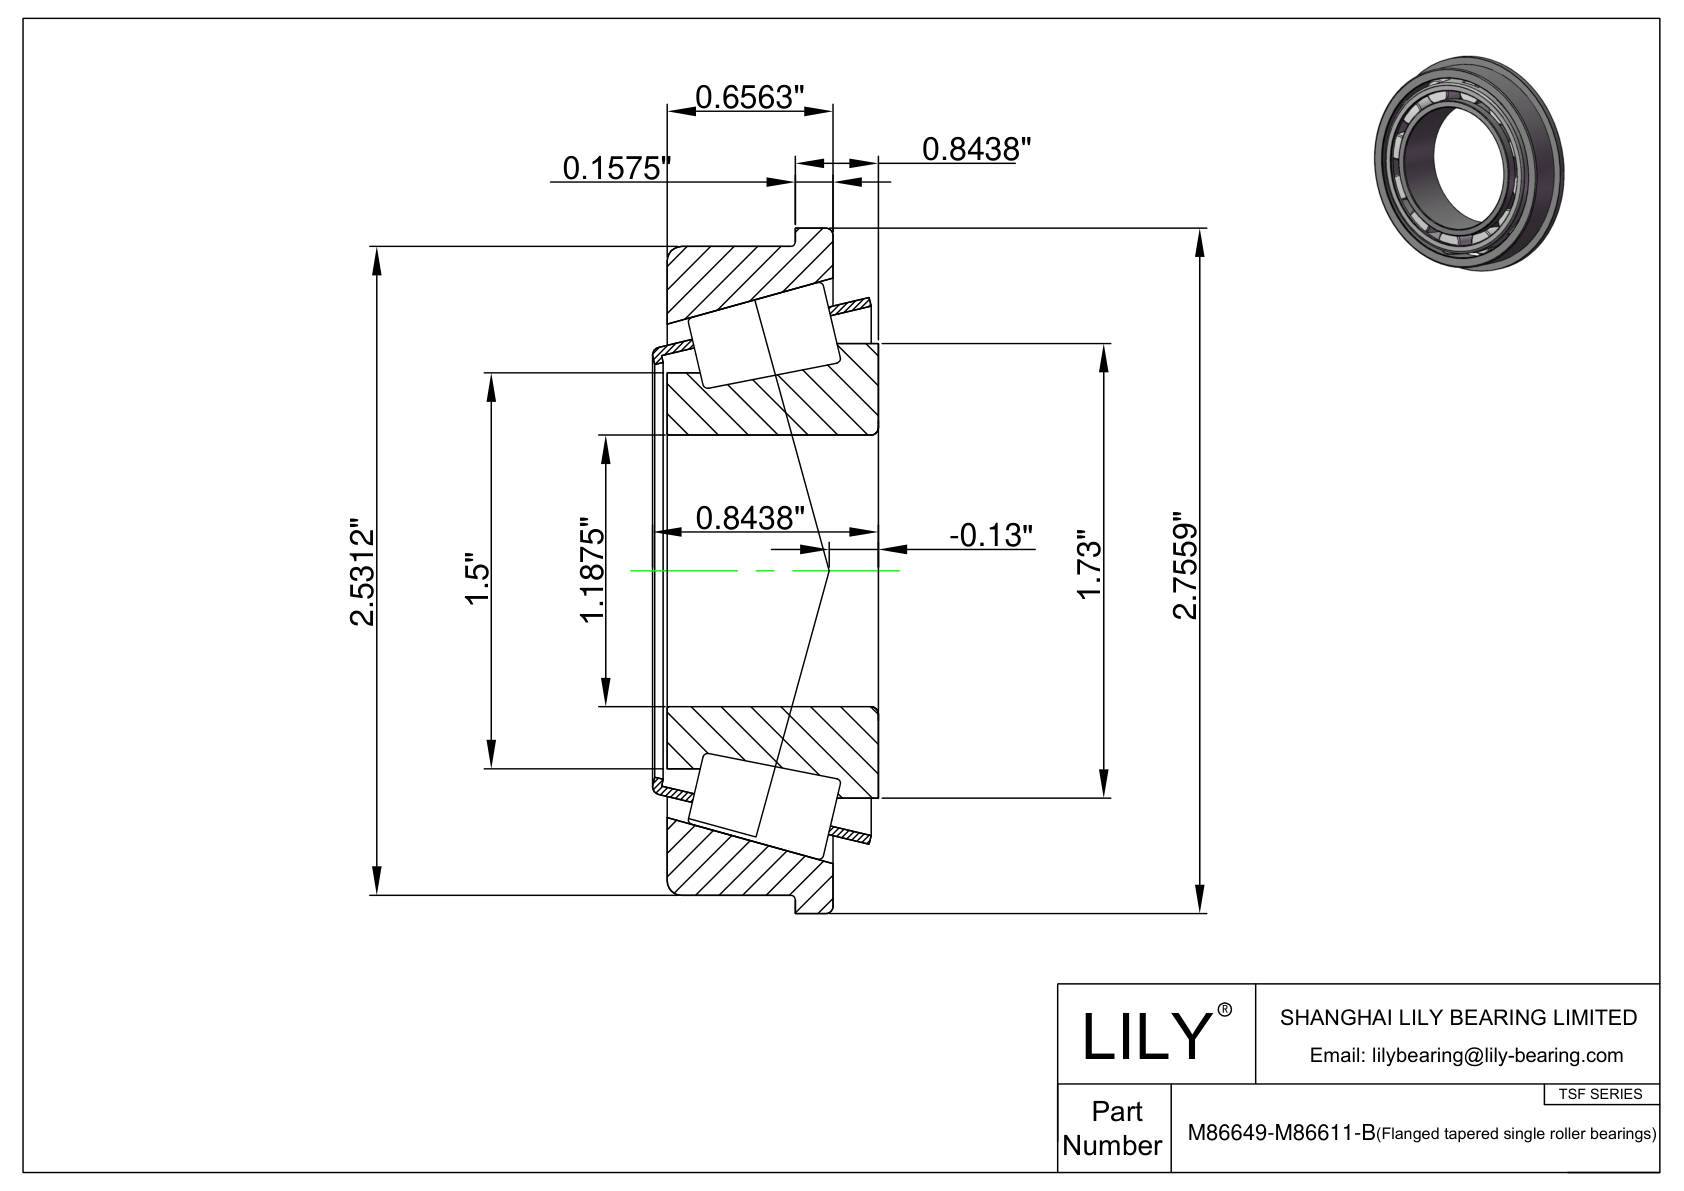 M86649-M86611-B TSF (Tapered Single Roller Bearings with Flange) (Imperial) cad drawing